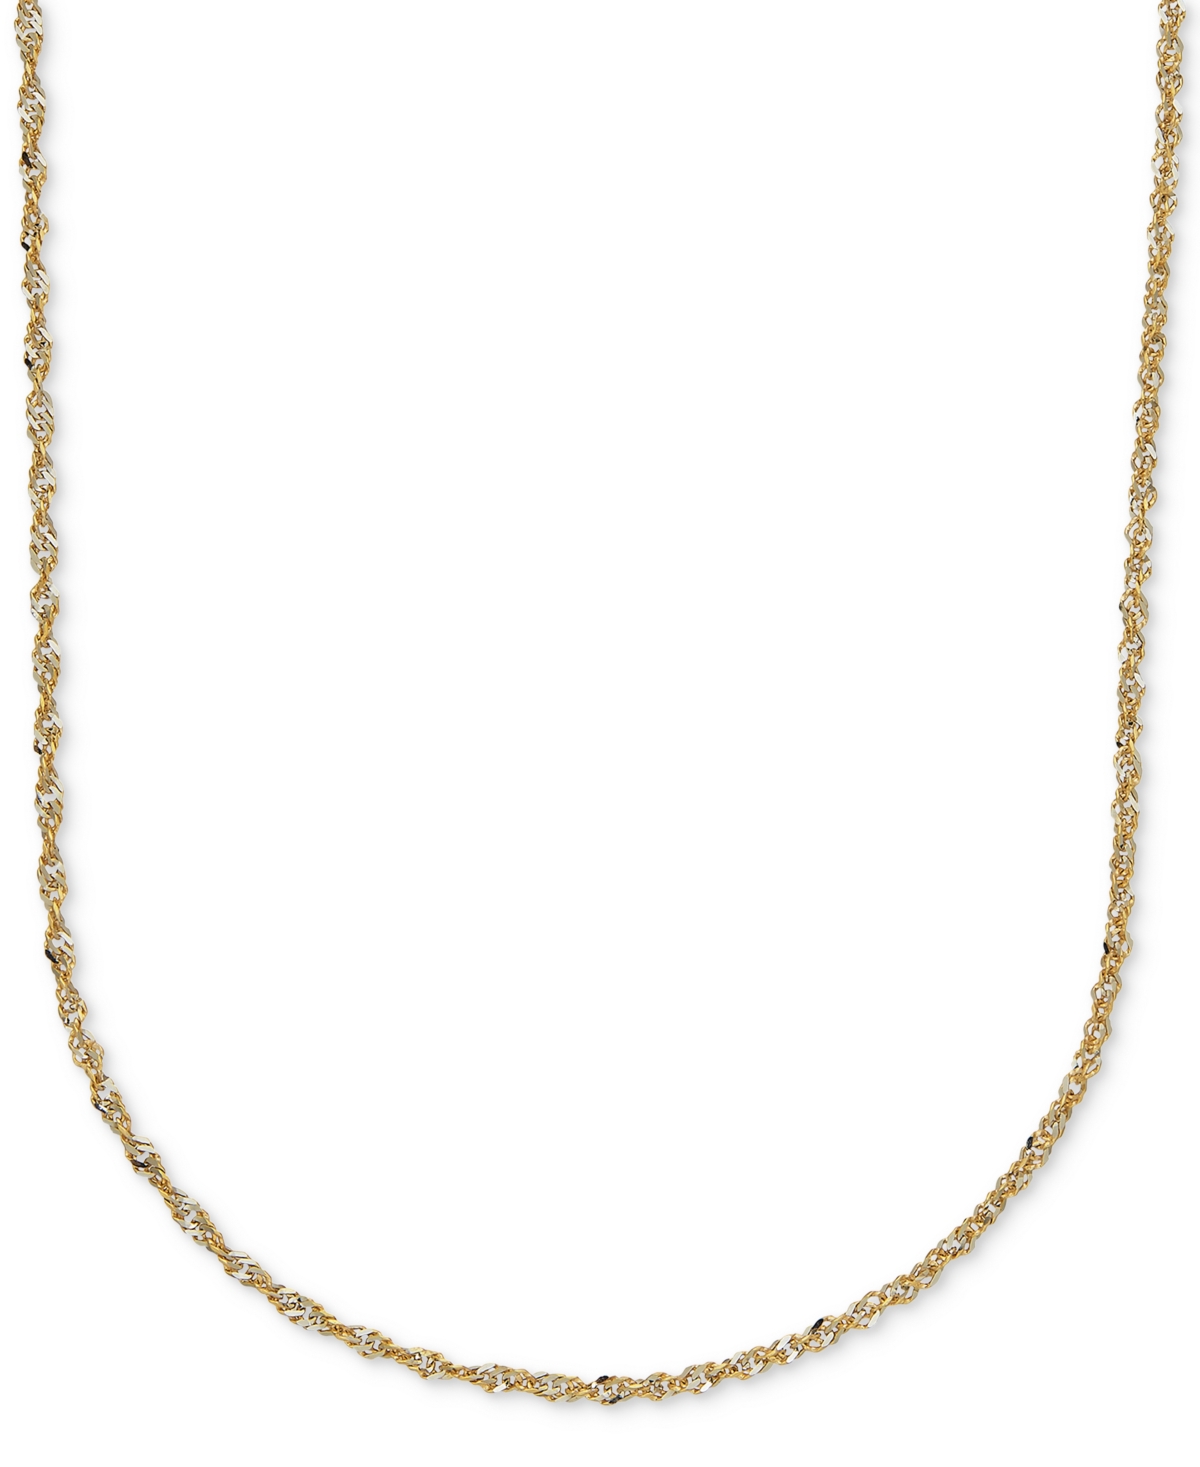 18" Italian Gold Two-Tone Perfectina Chain Necklace (1-1/3mm) in 14k Gold - Yellow Gold